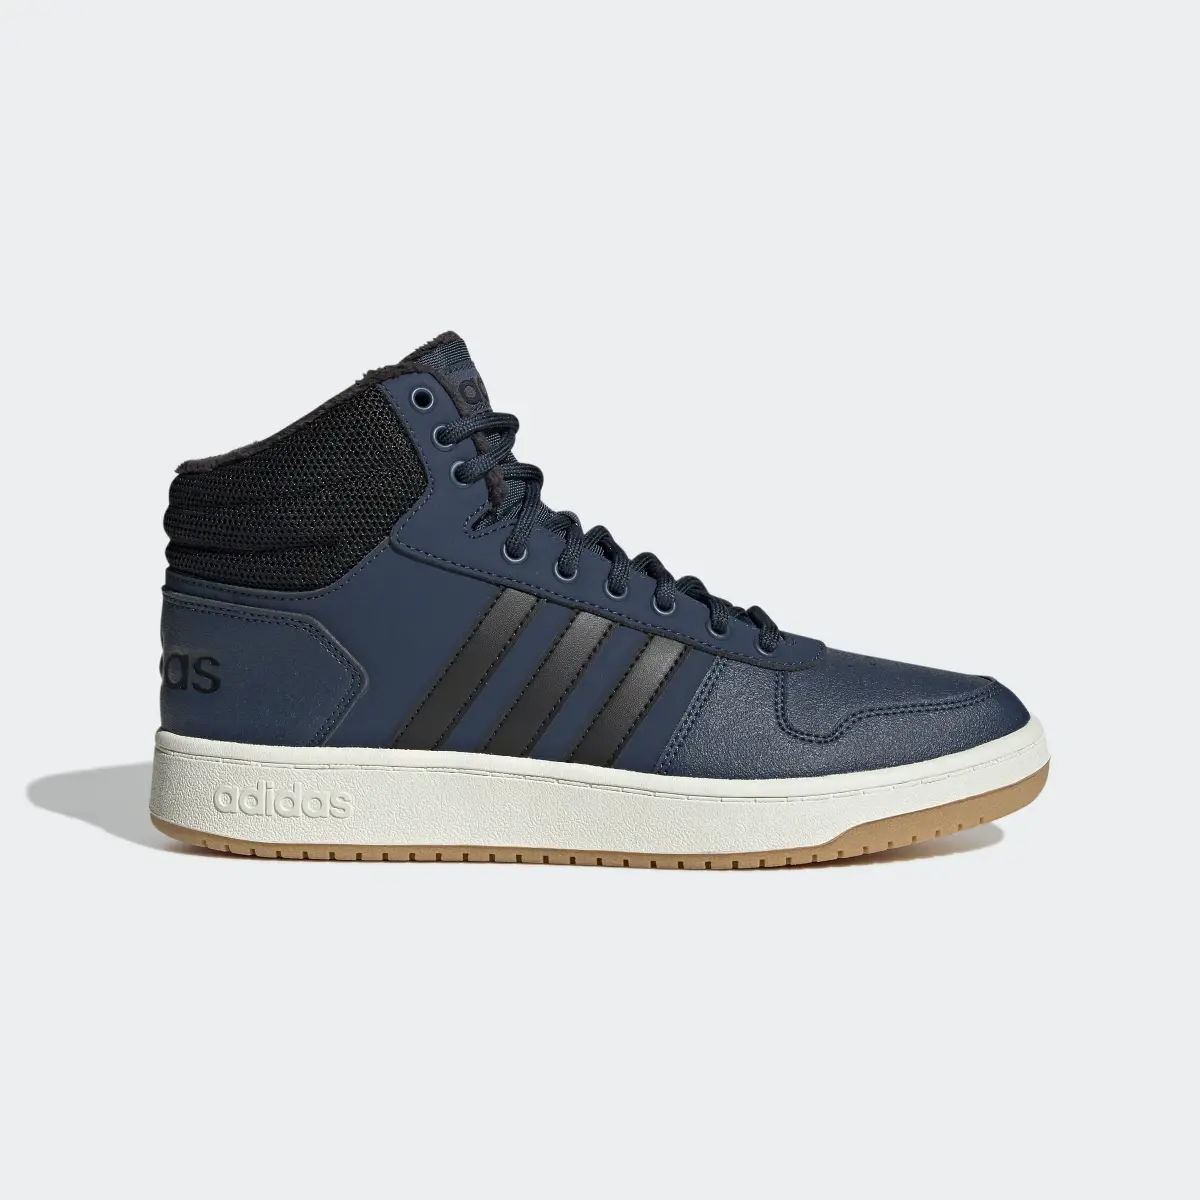 Adidas Chaussure Hoops 2.0 Mid. 2